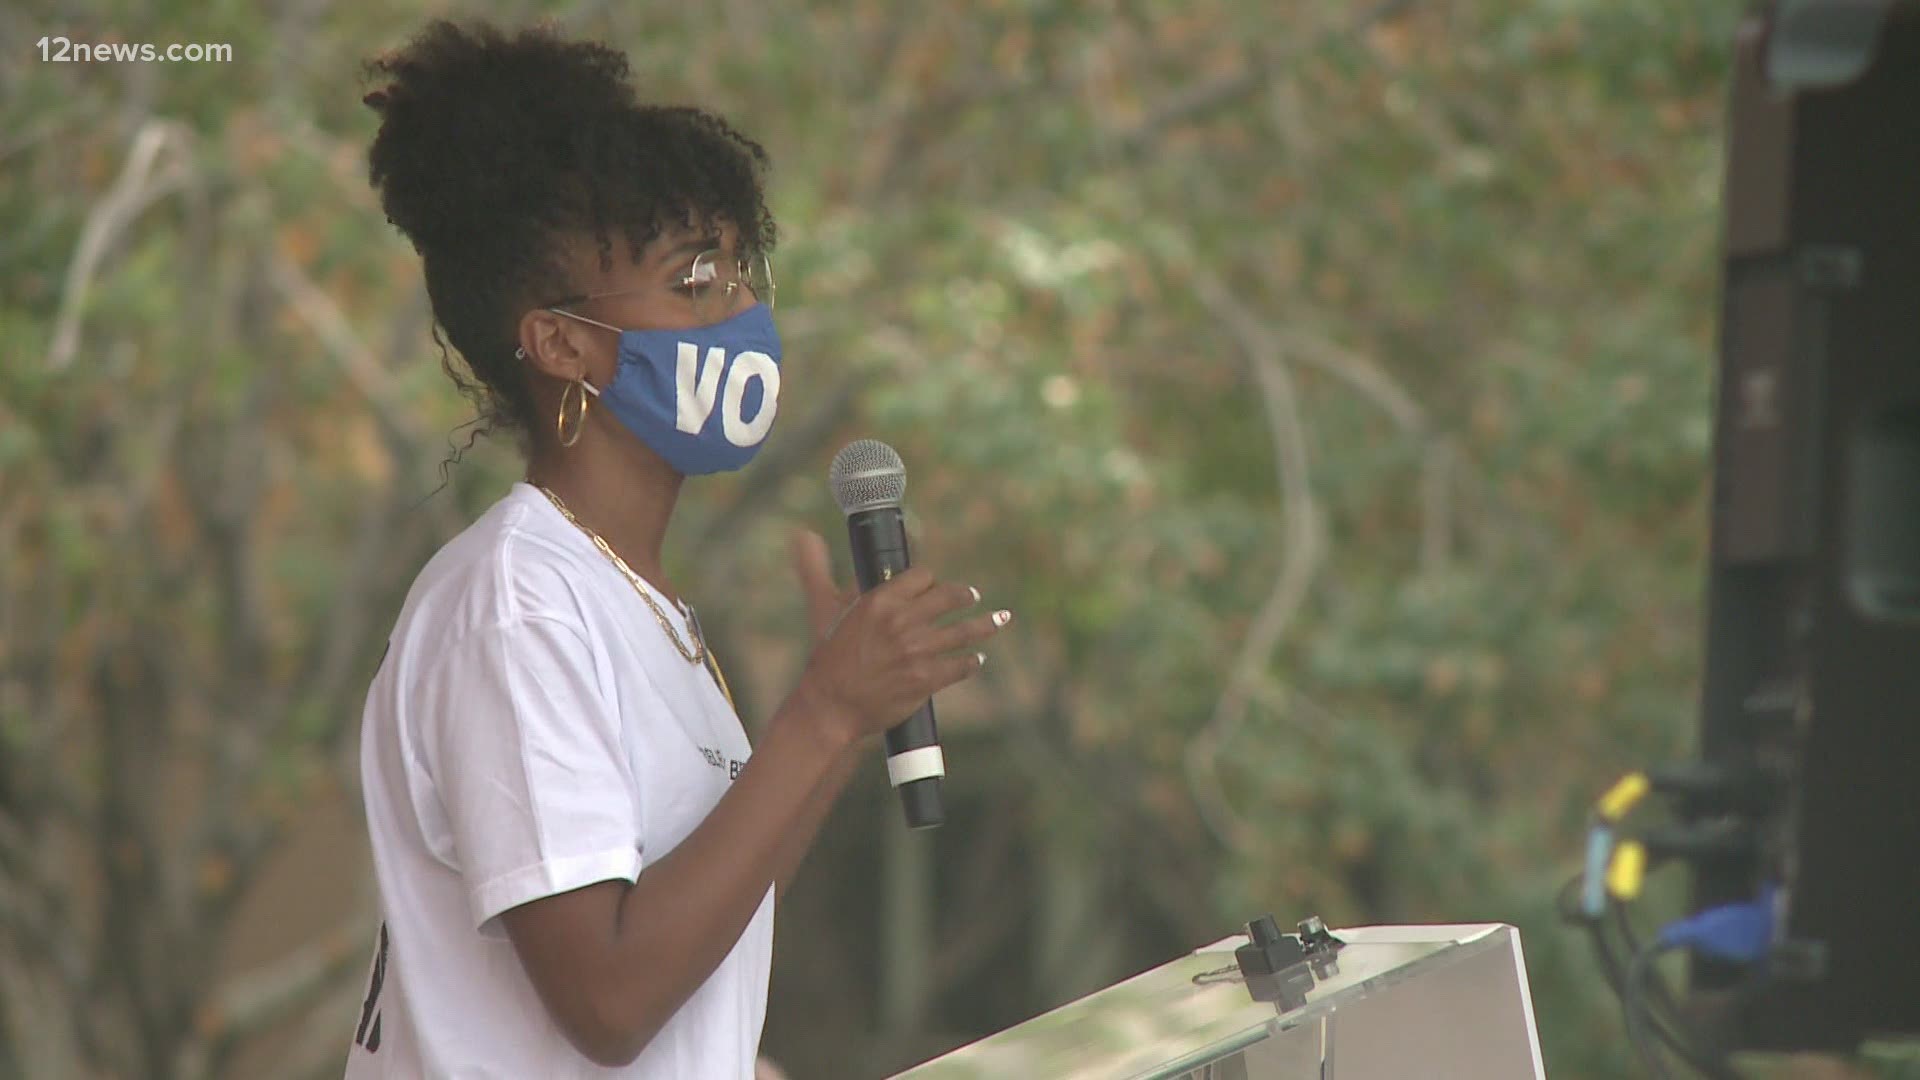 Kerry Washington made a trip to State 48 to encourage early voting with the Biden campaign.